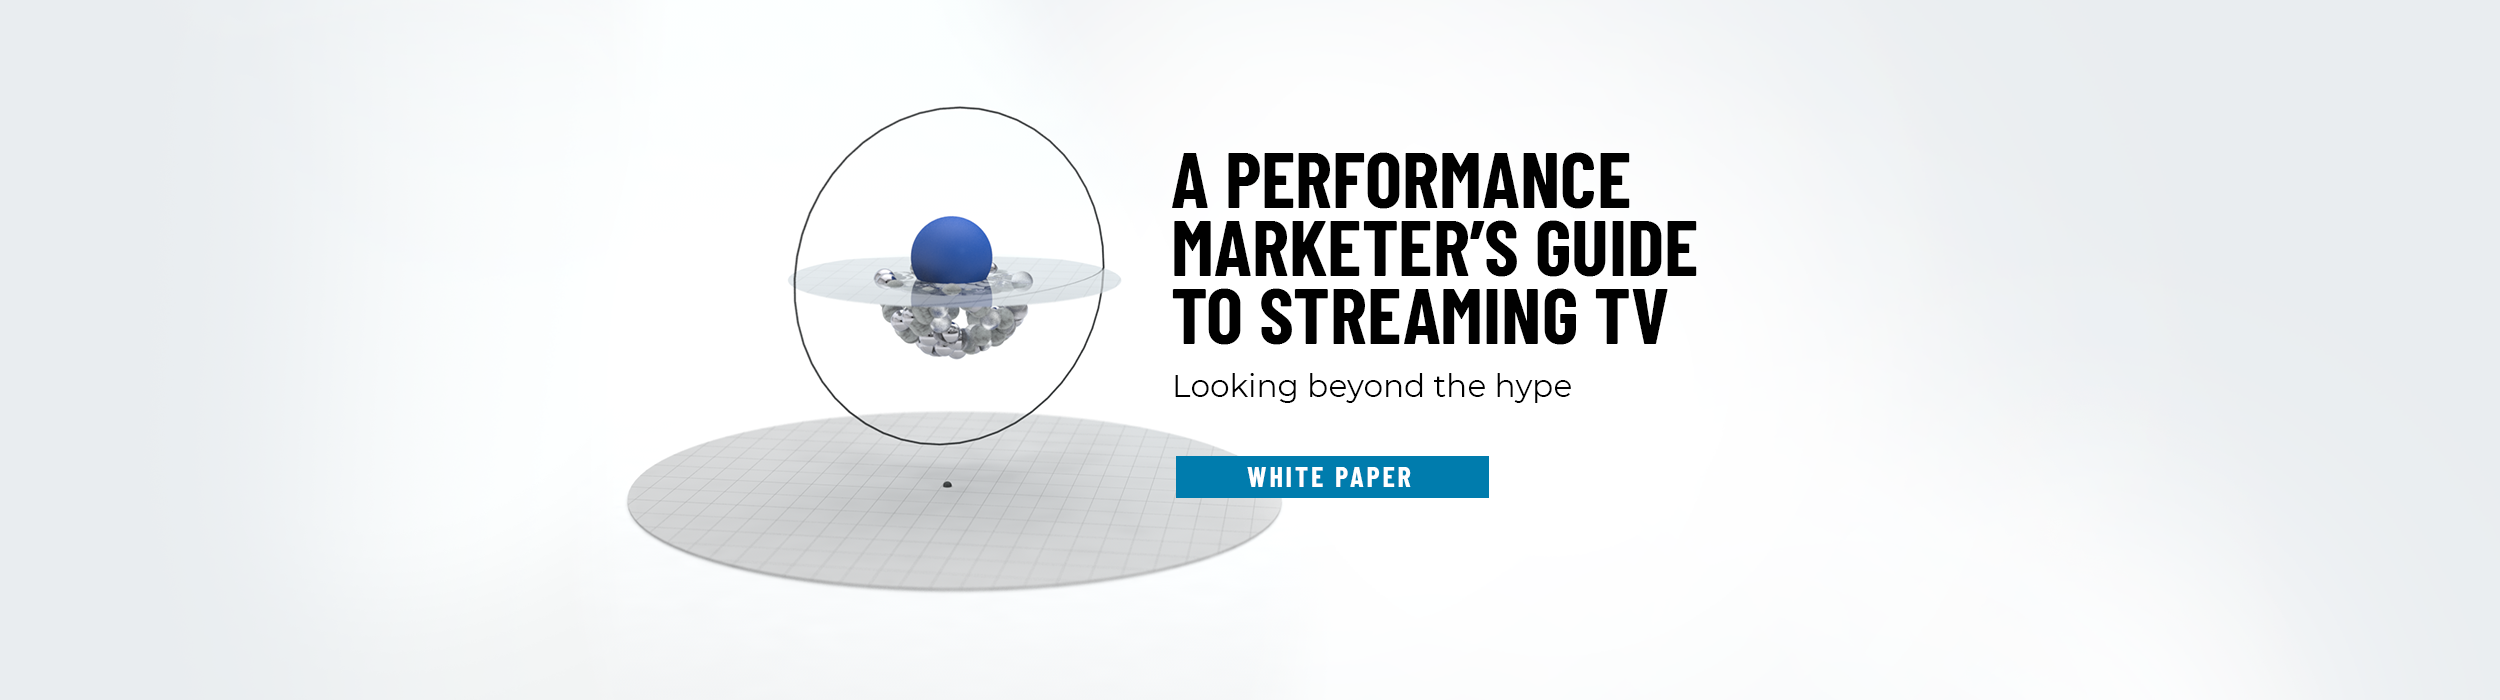 The Performance Marketer's Guide to Streaming TV